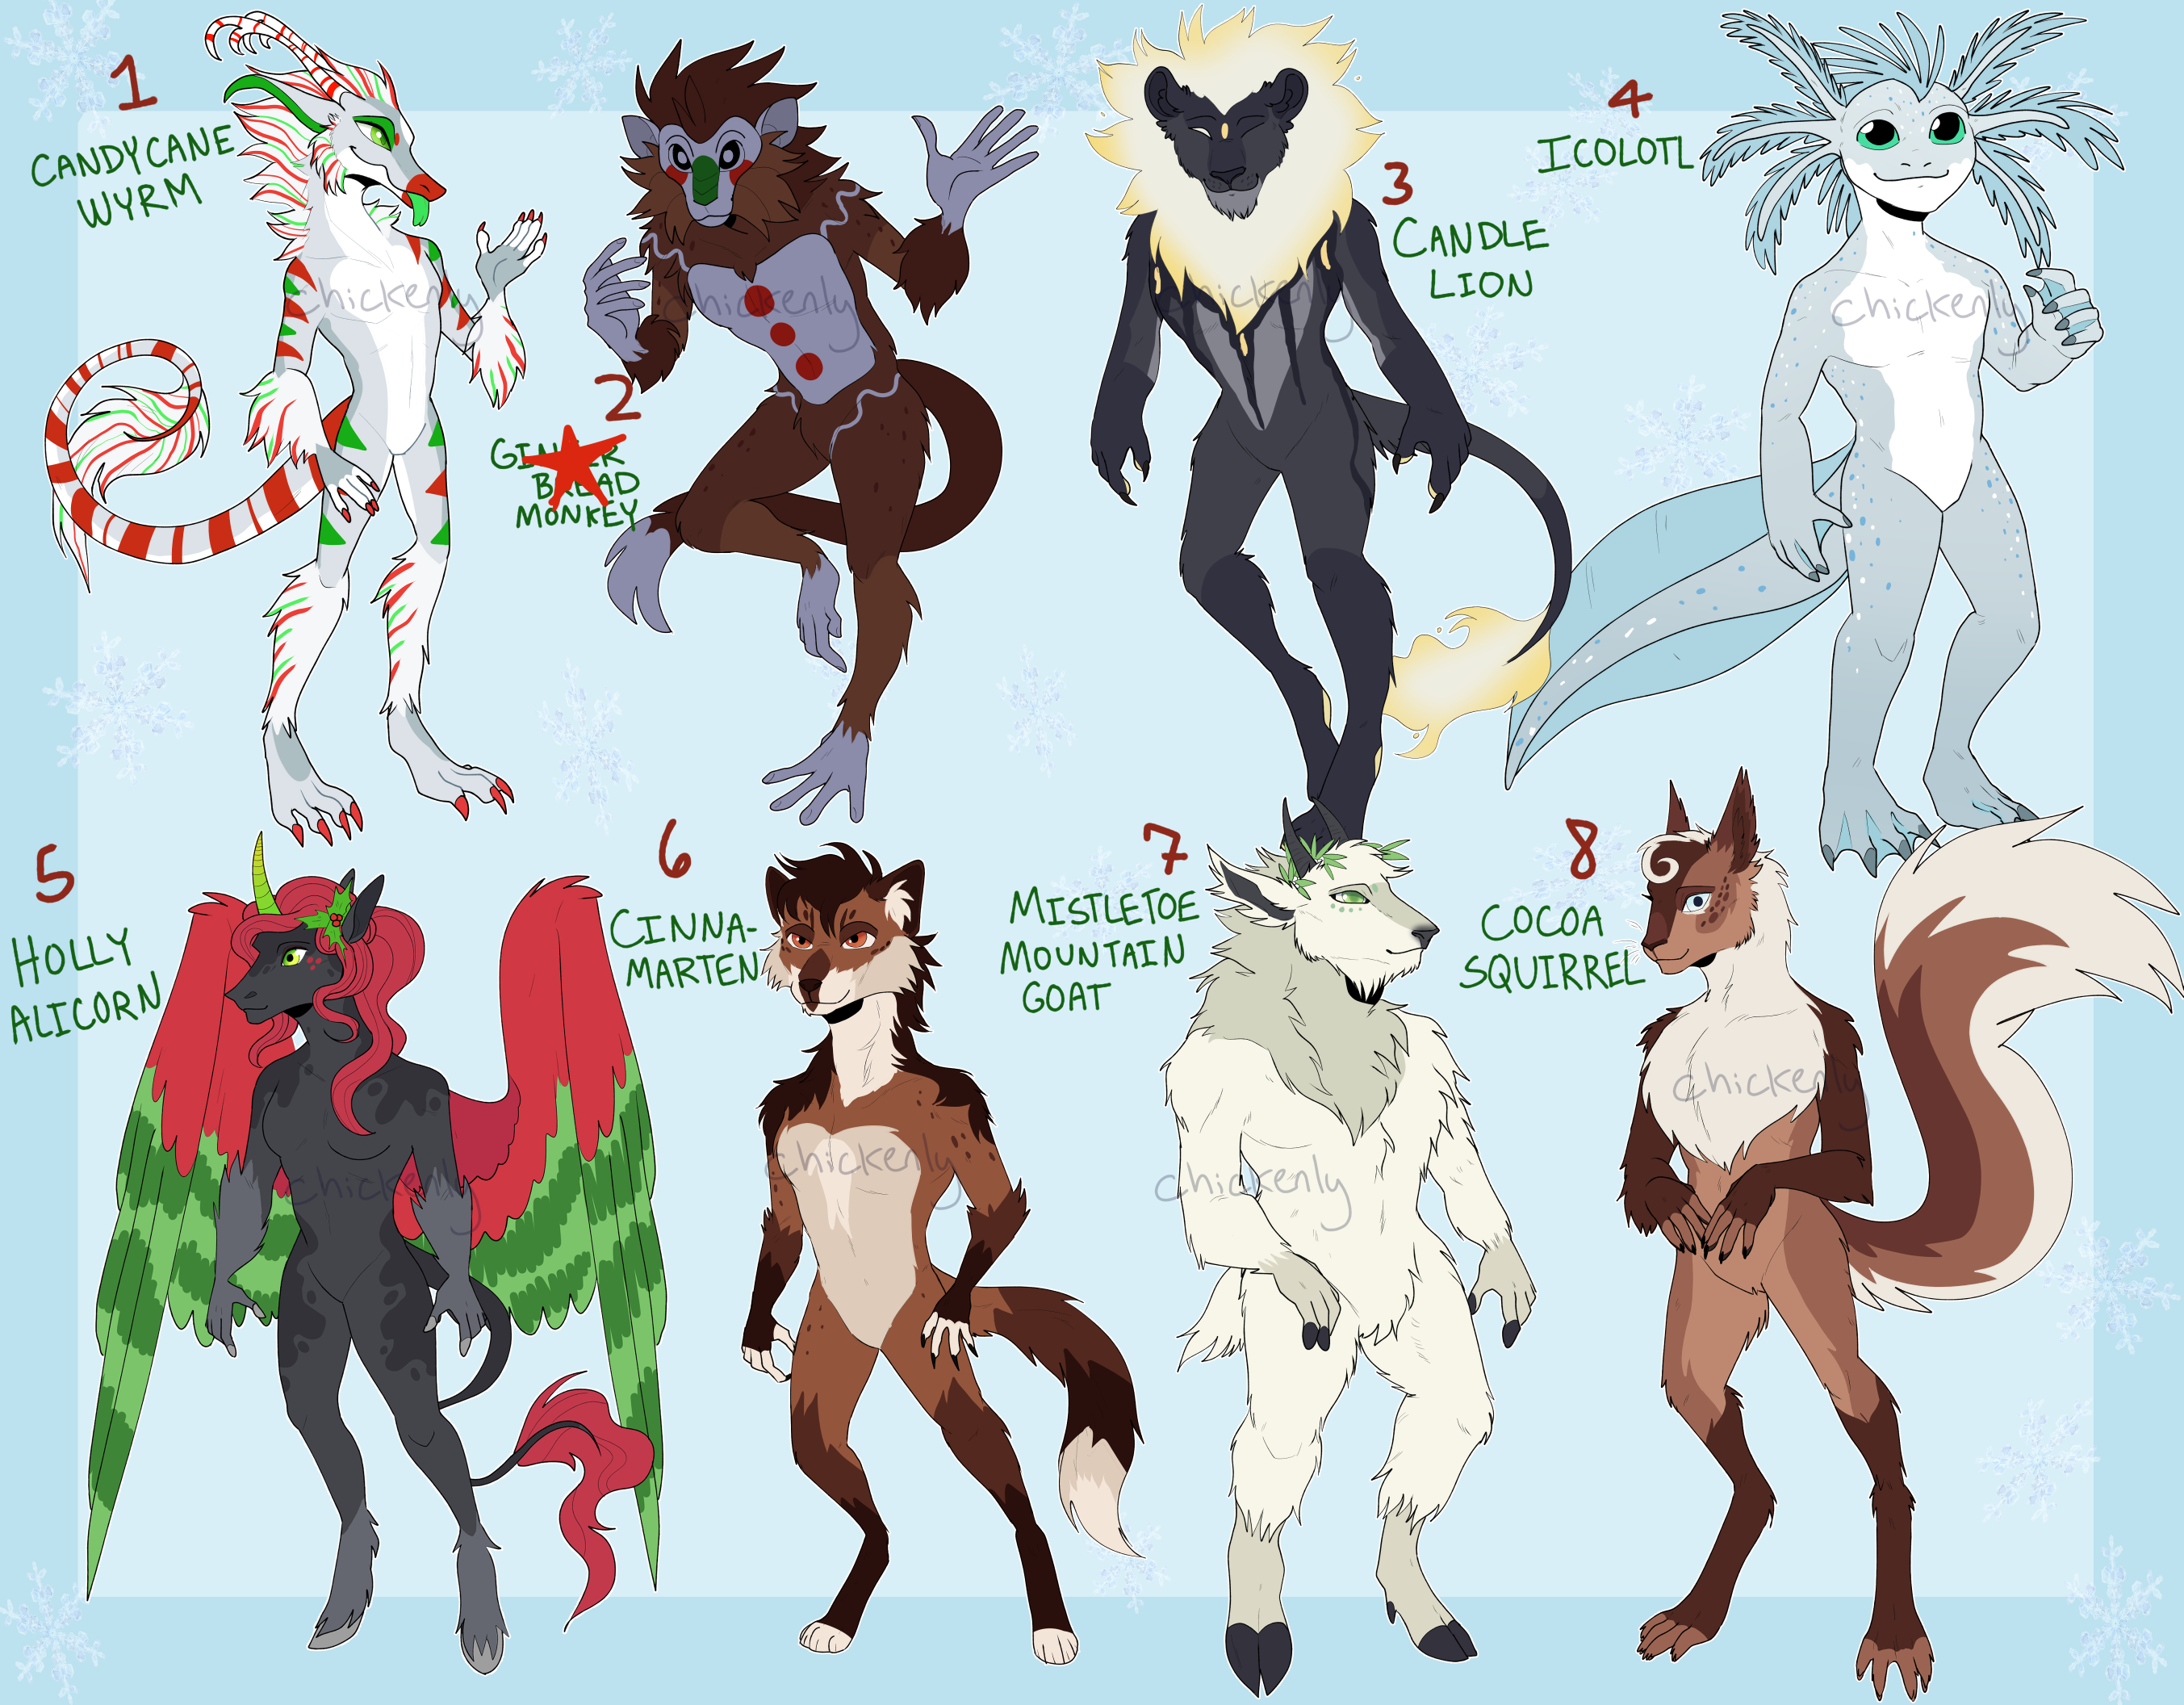 1606417043.chickenly_festiveadopts1_by_chickenly_de9ets0